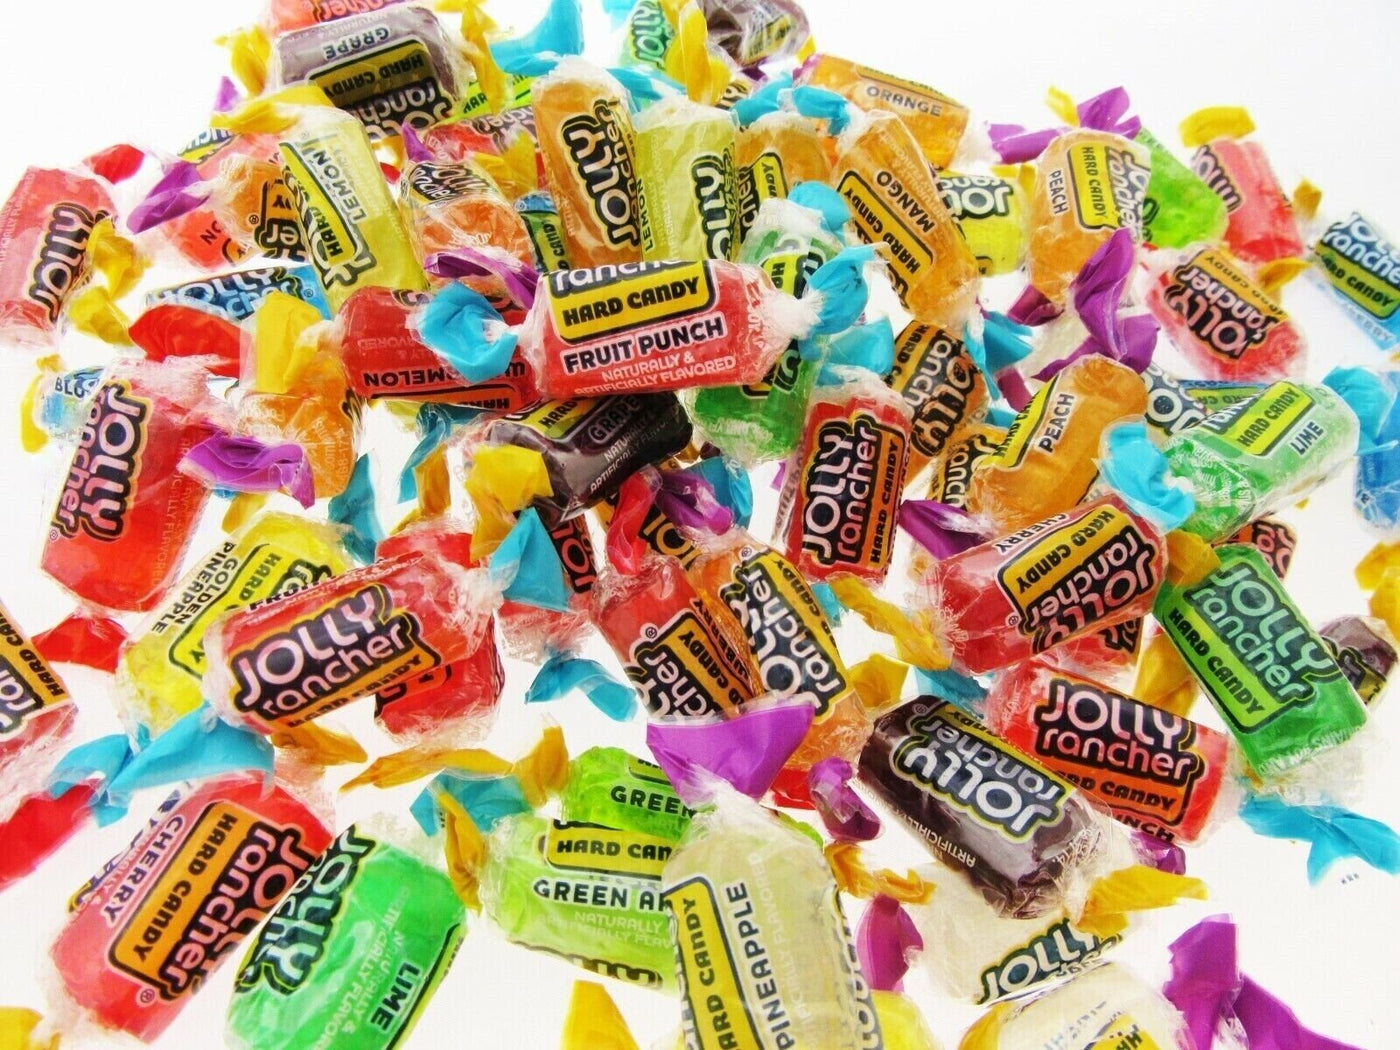 Jolly Rancher 14 Flavor Mix Hard Candy American Favorite One Pound (16oz) sweets